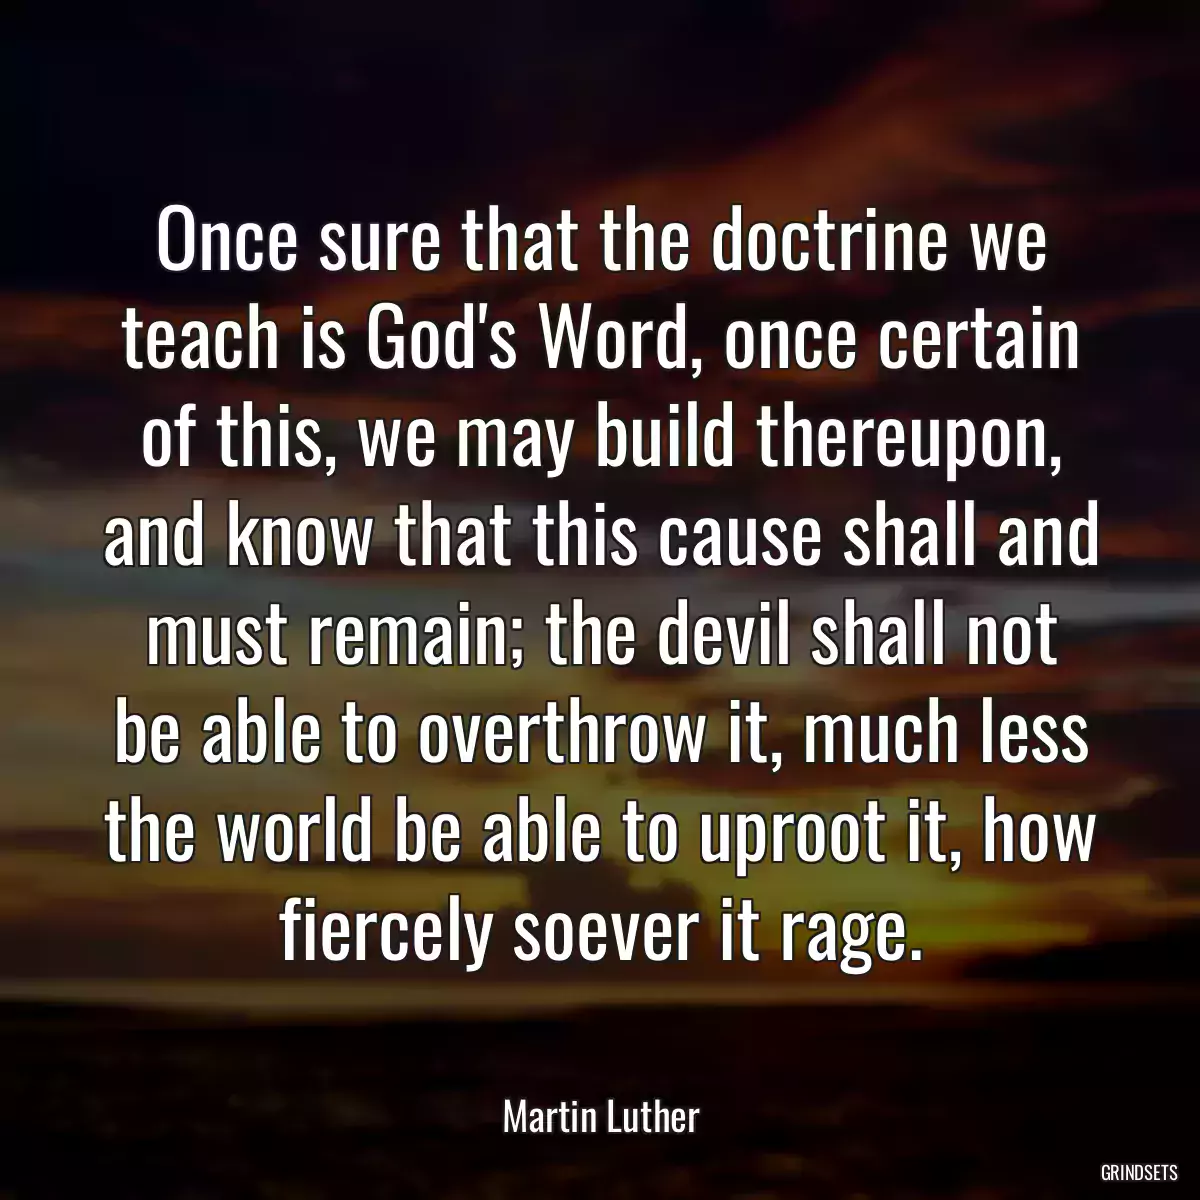 Once sure that the doctrine we teach is God\'s Word, once certain of this, we may build thereupon, and know that this cause shall and must remain; the devil shall not be able to overthrow it, much less the world be able to uproot it, how fiercely soever it rage.